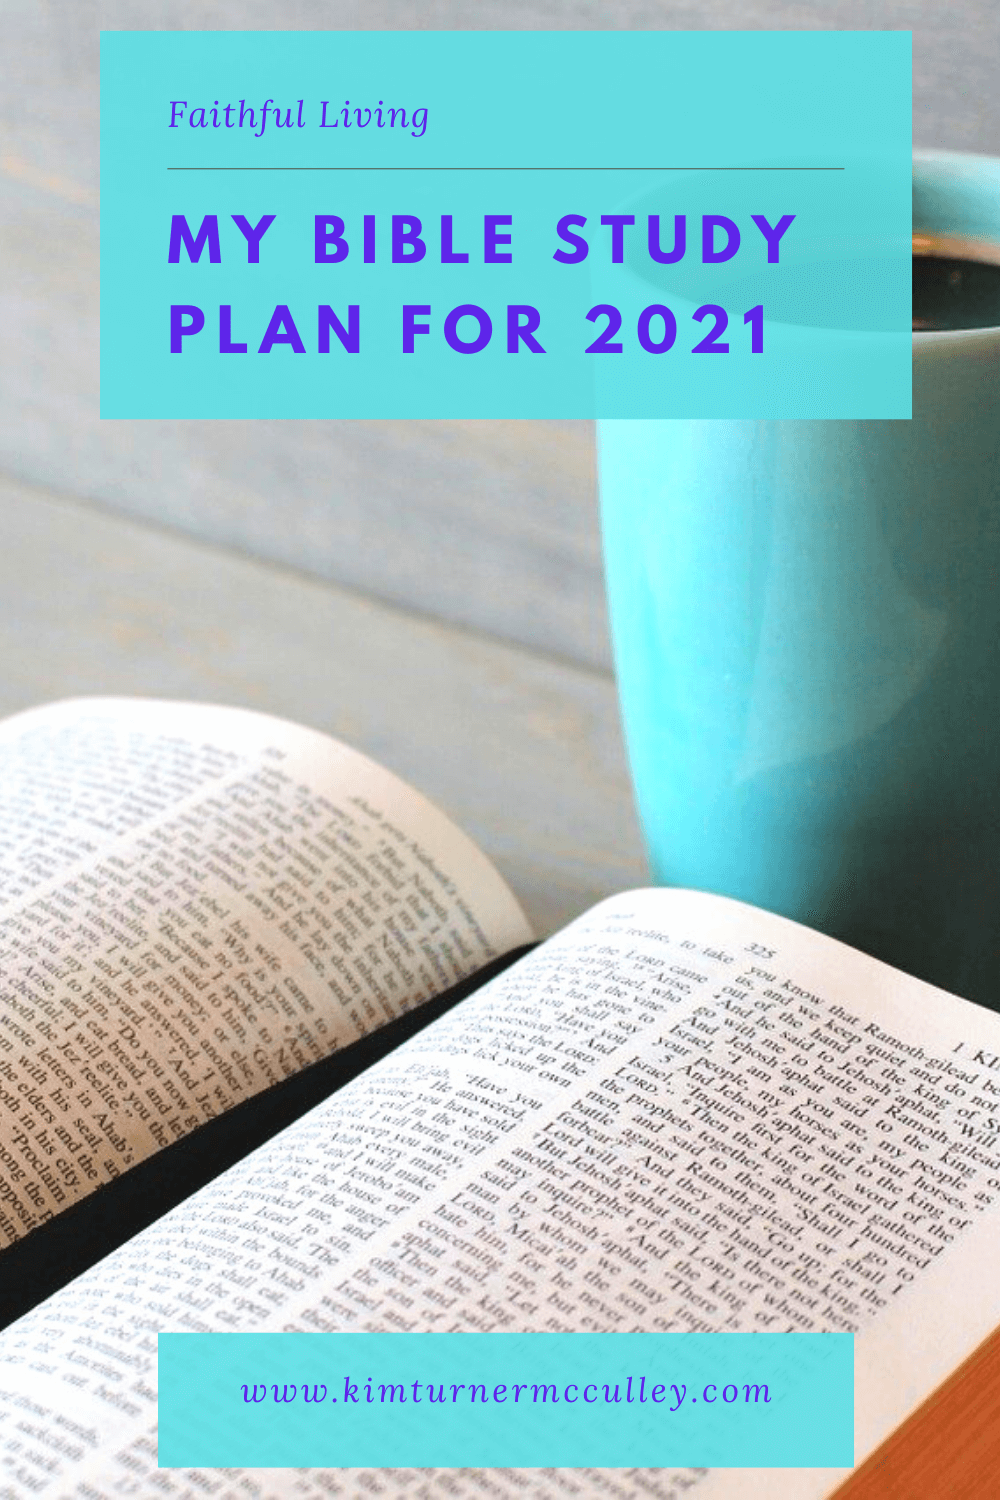 Join as I share my Bible Study plan for the year. Recommendations for reading plans, books, podcasts, resources. #biblestudy #devotions KimTurnerMcCulley.com